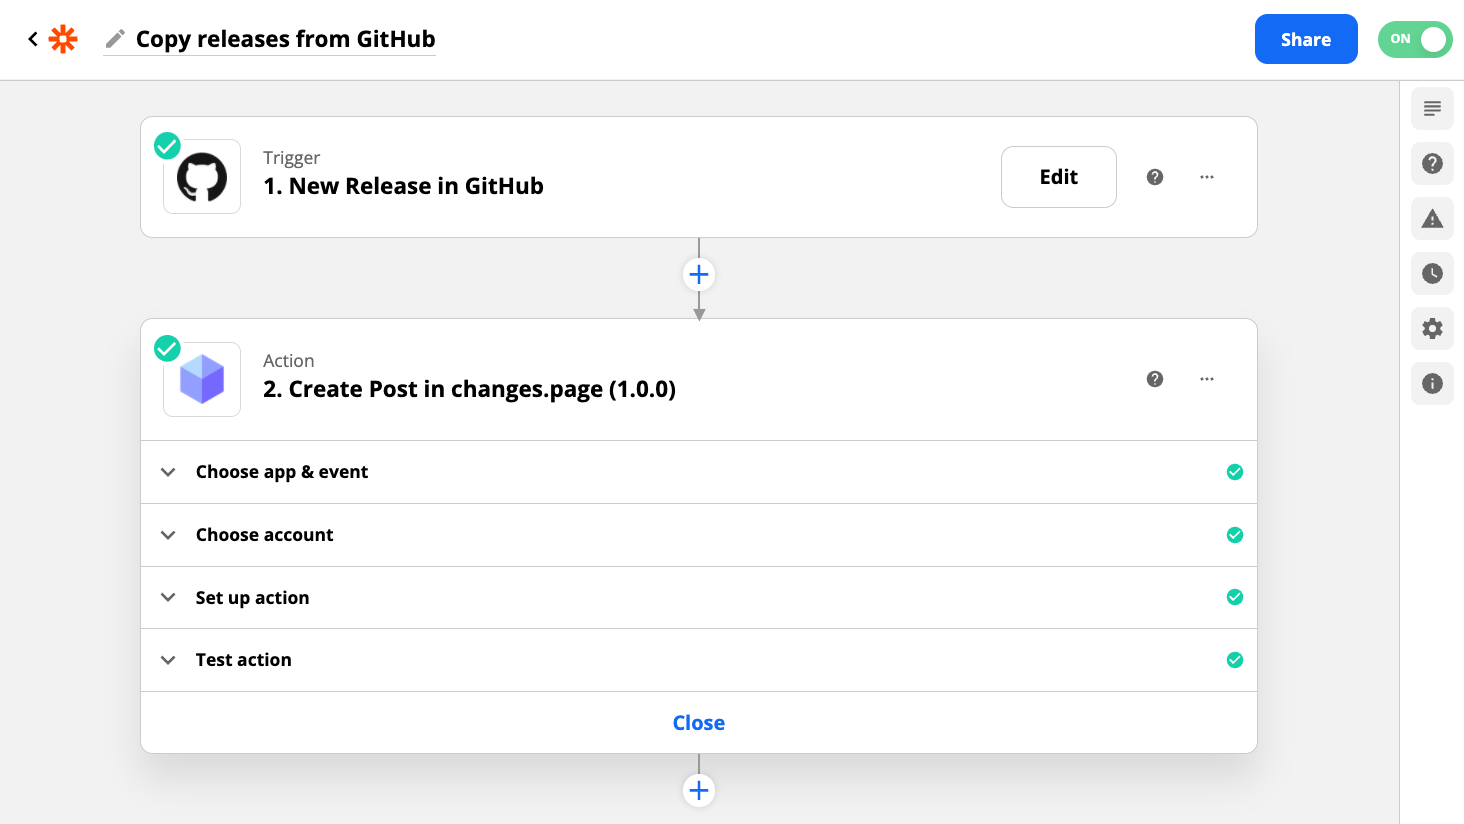 Copy releases from GitHub